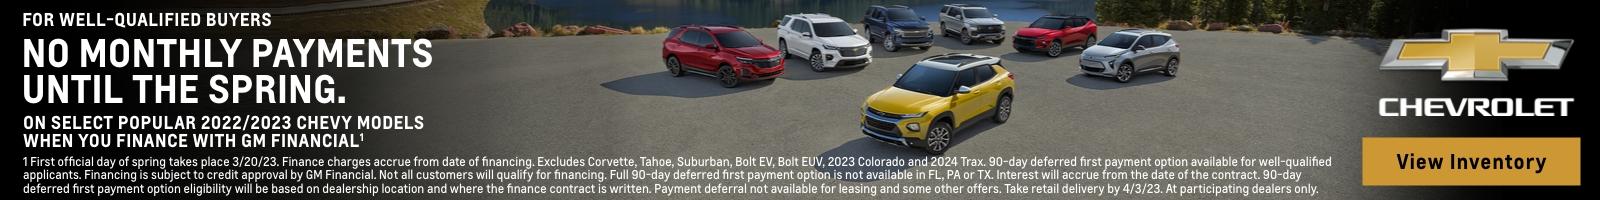 For well-qualified buyers no monthly payments until the spring. On select popular 2022/2023 Chevy models when you finance with GM financial. First official day of spring takes place 3/20/23. Finance charges accrue from date of financing.